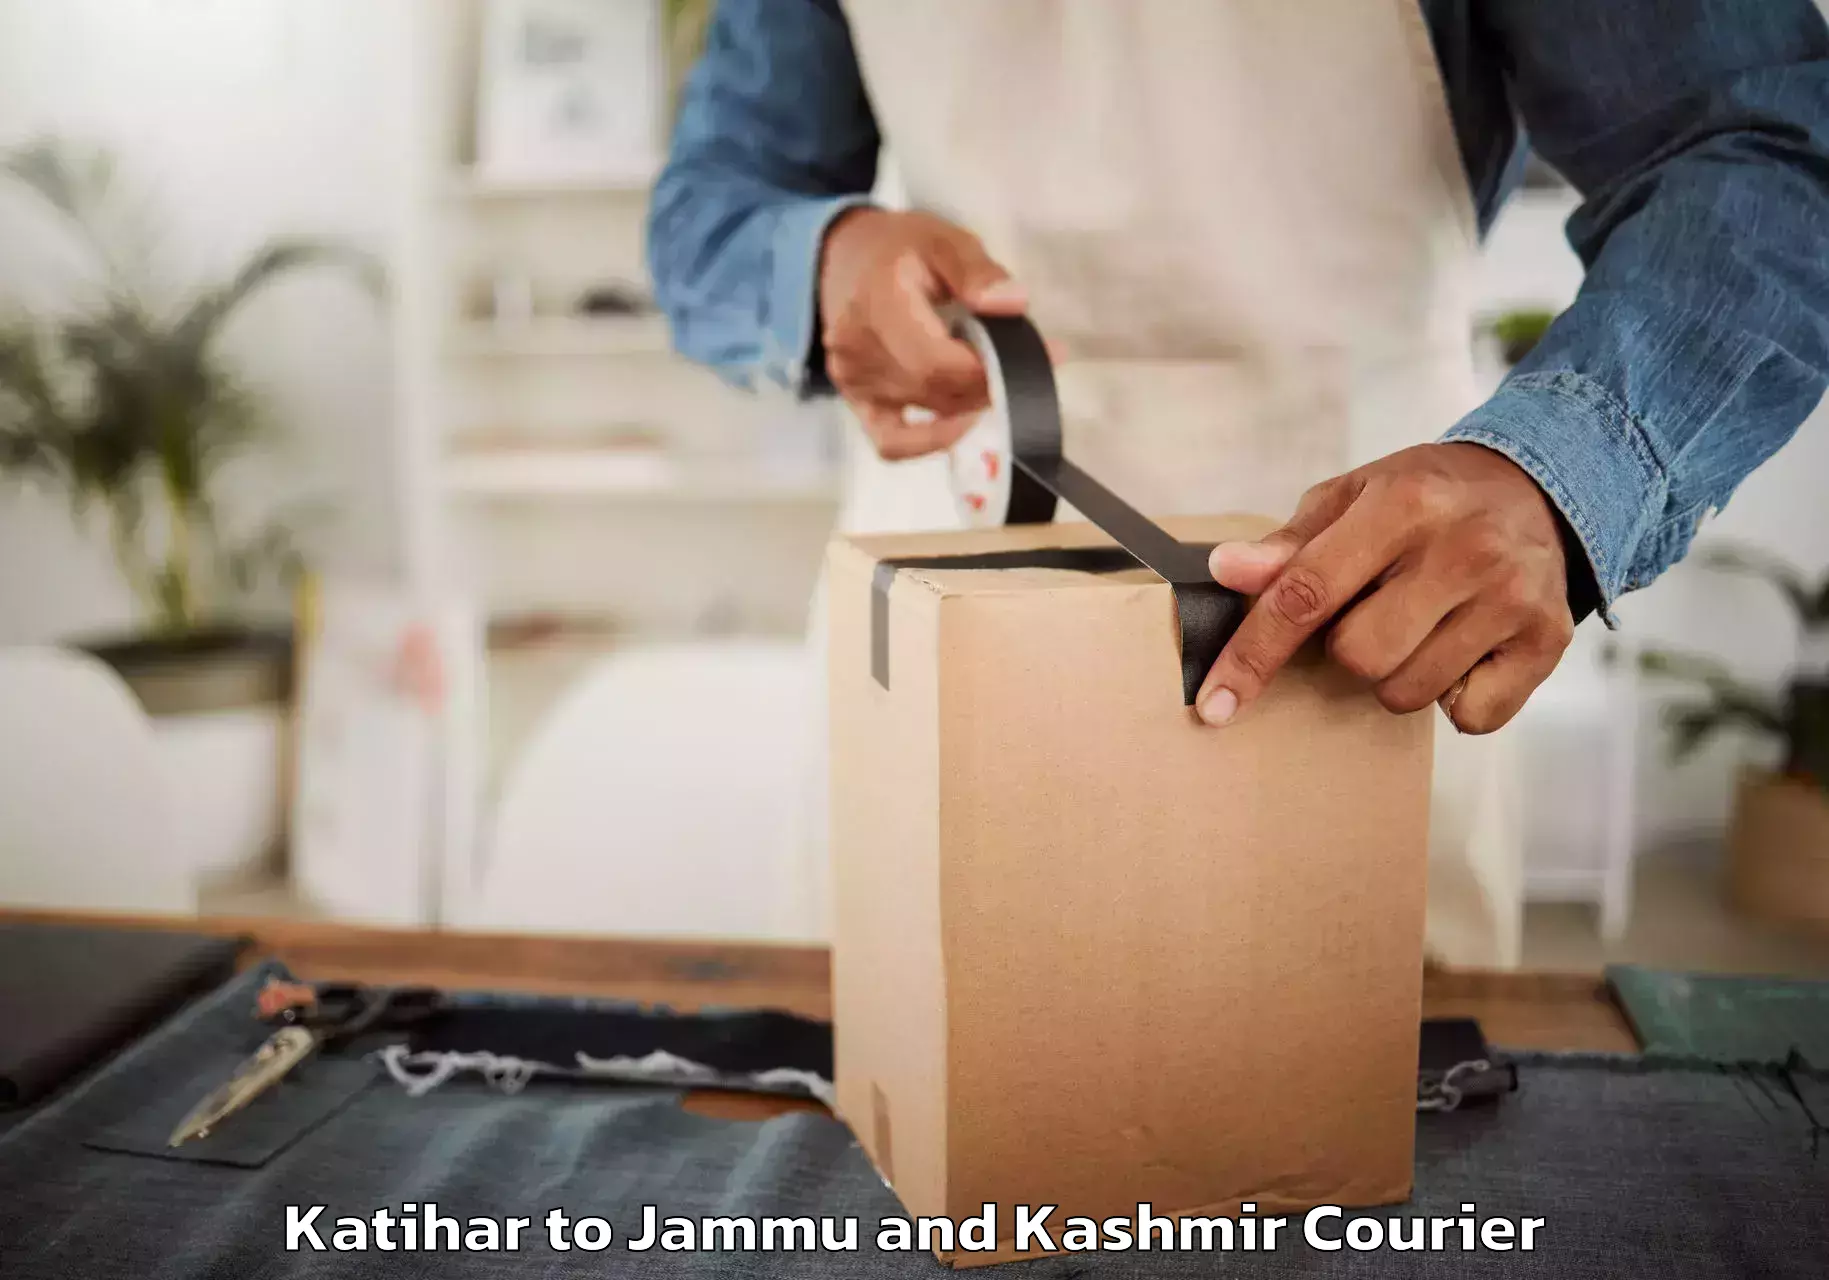 Furniture delivery service Katihar to Budgam